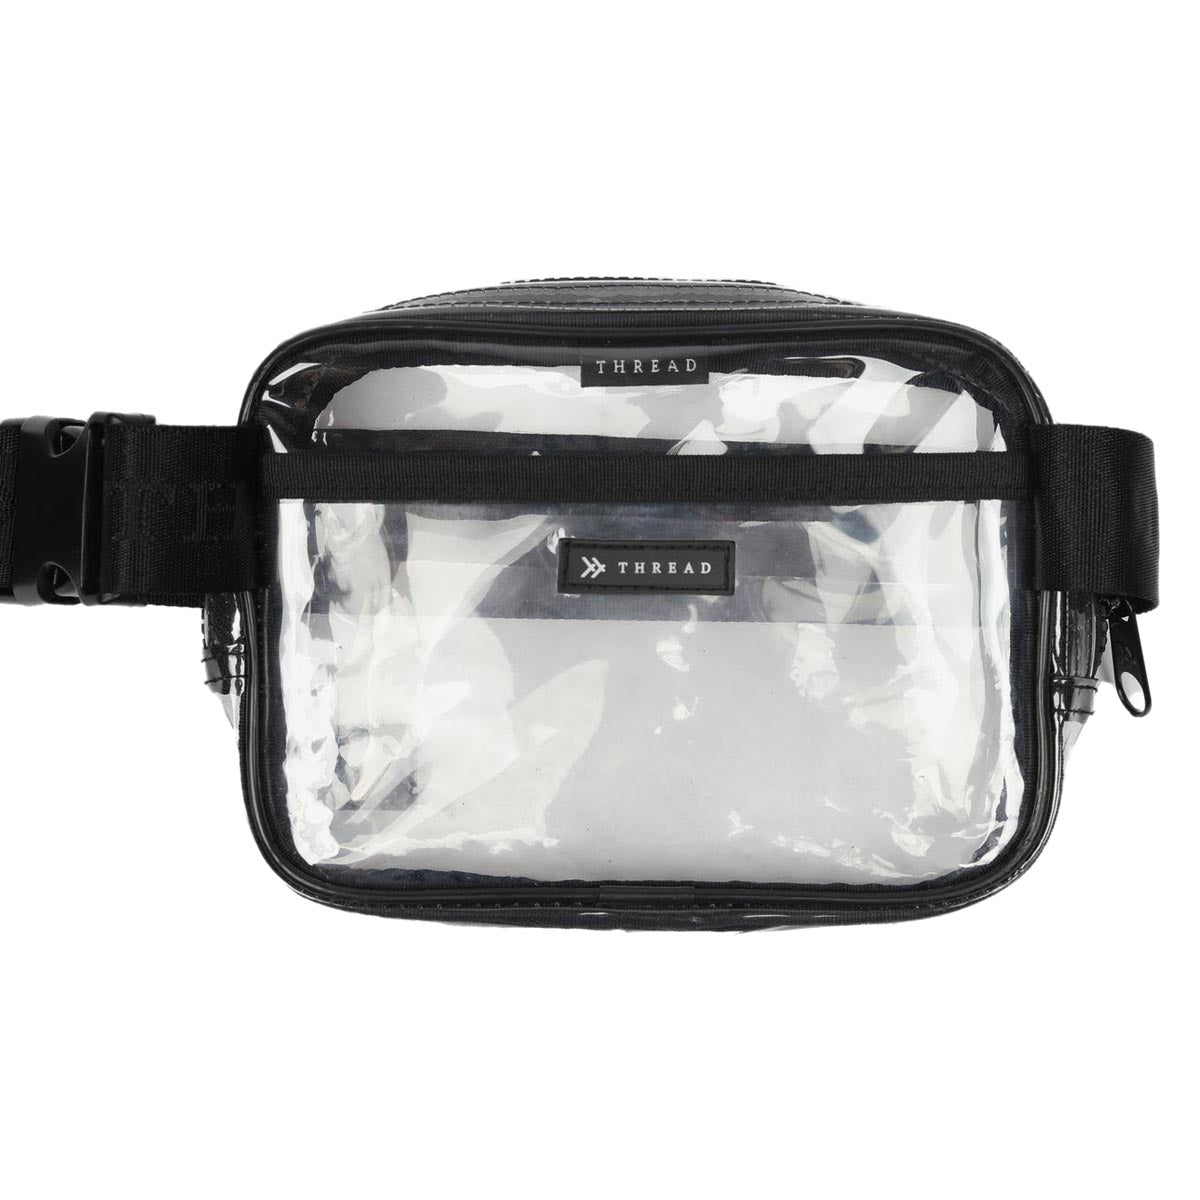 Thread Fanny Pack Bag - Clear image 2